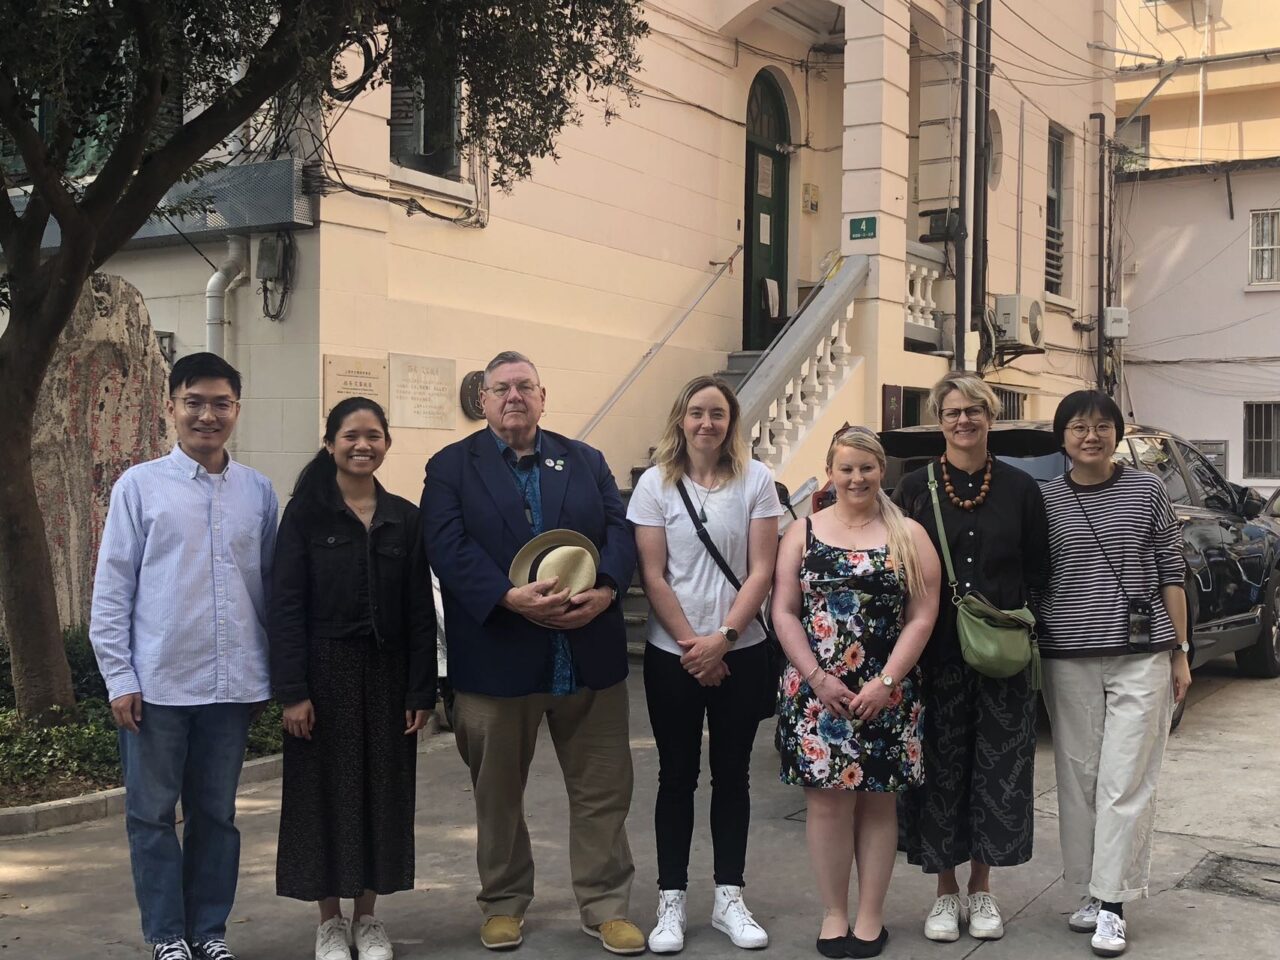 Delegation members and our SPAFFC hosts outside Rewi Alley's former residence in Shanghai.